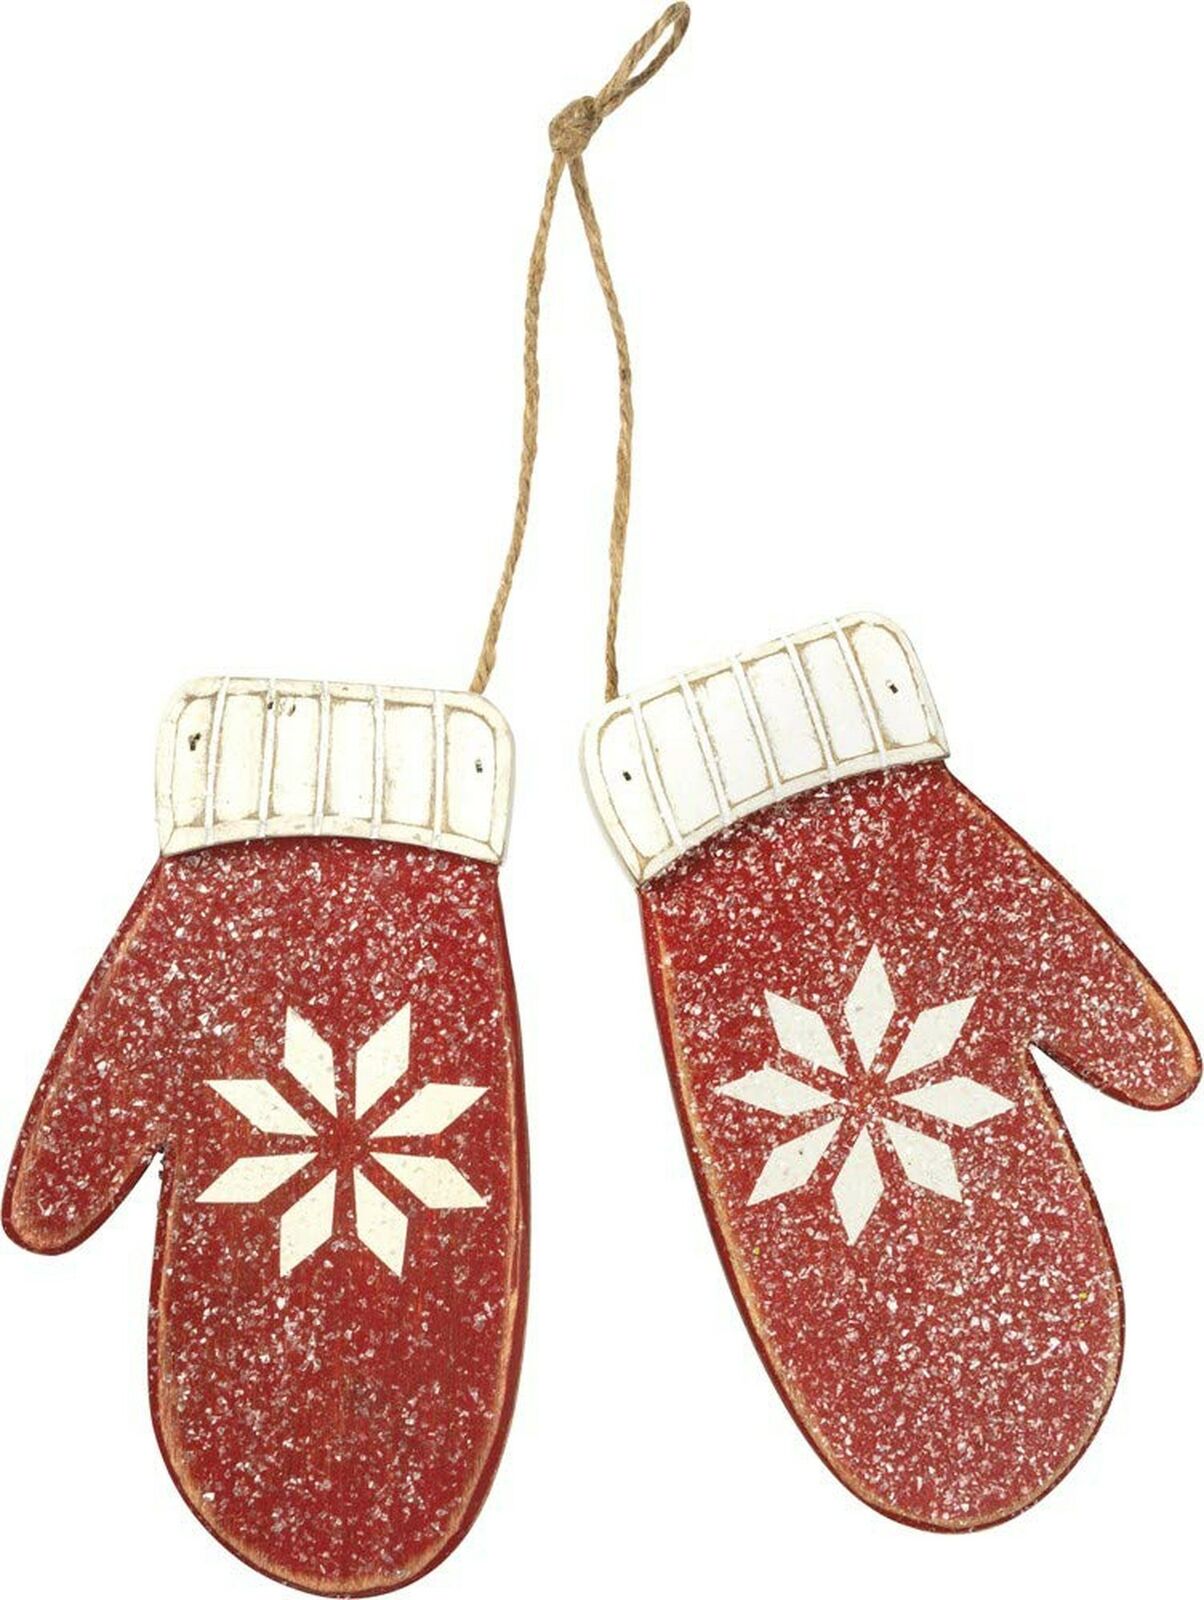 Primitive by Kathy Hand Carved Mittens - Hanging Decor